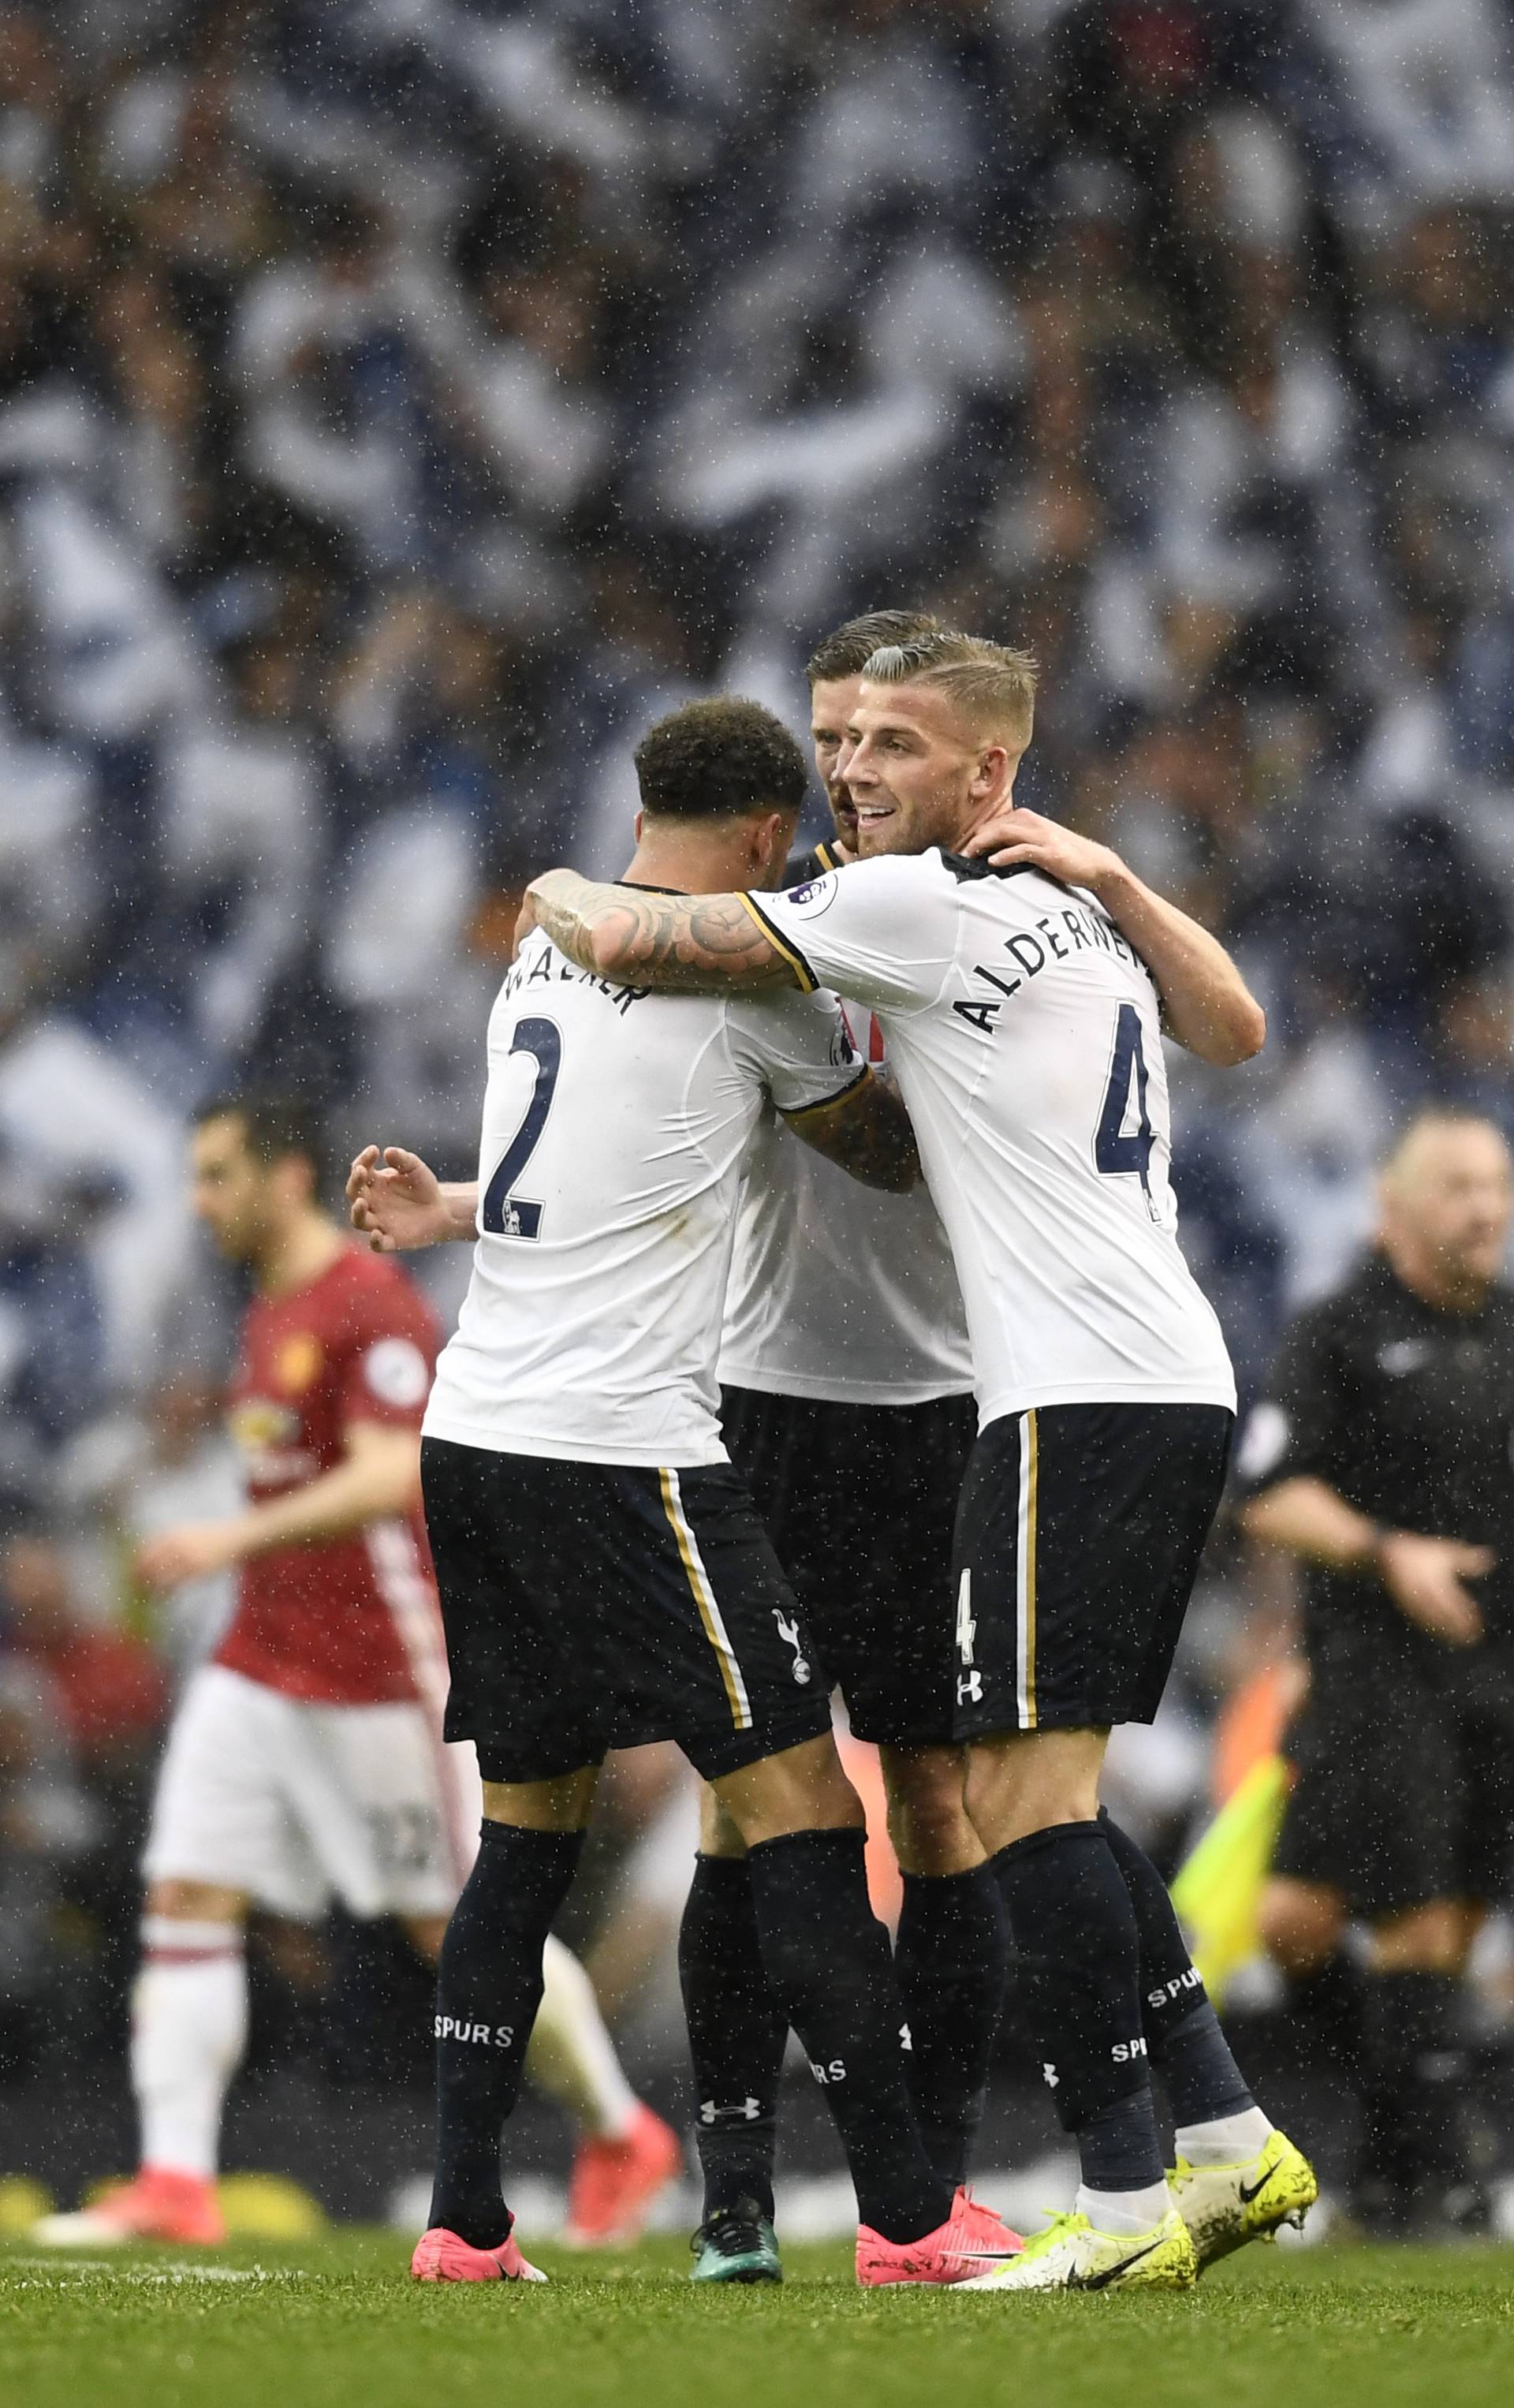 Tottenham's Toby Alderweireld and Kyle Walker celebrate after the match